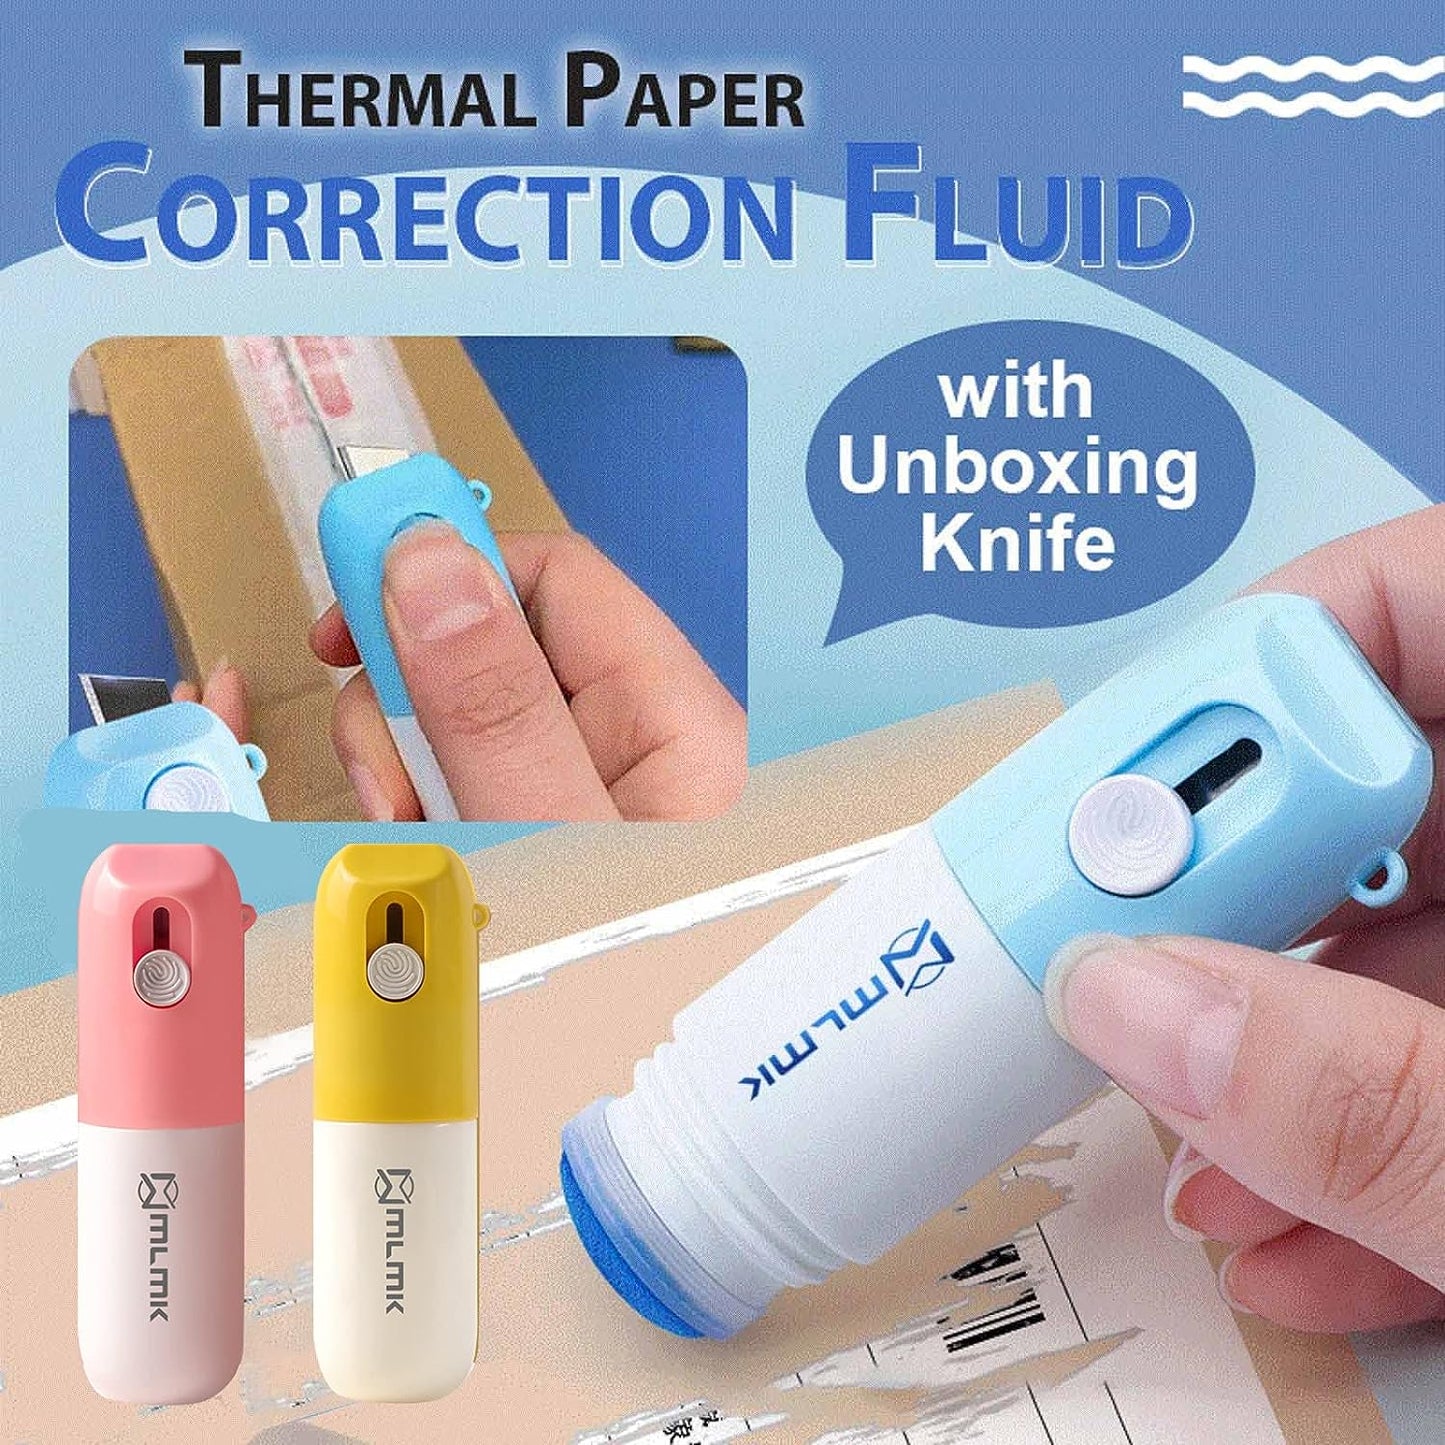 Thermal Paper Correction Fluid with Unboxing Knife, Portable Anti-Leakage Privacy Protection Tool, 2 in 1 Privacy Protection Artifact for Personal Privacy and Office Appliances (Pink)